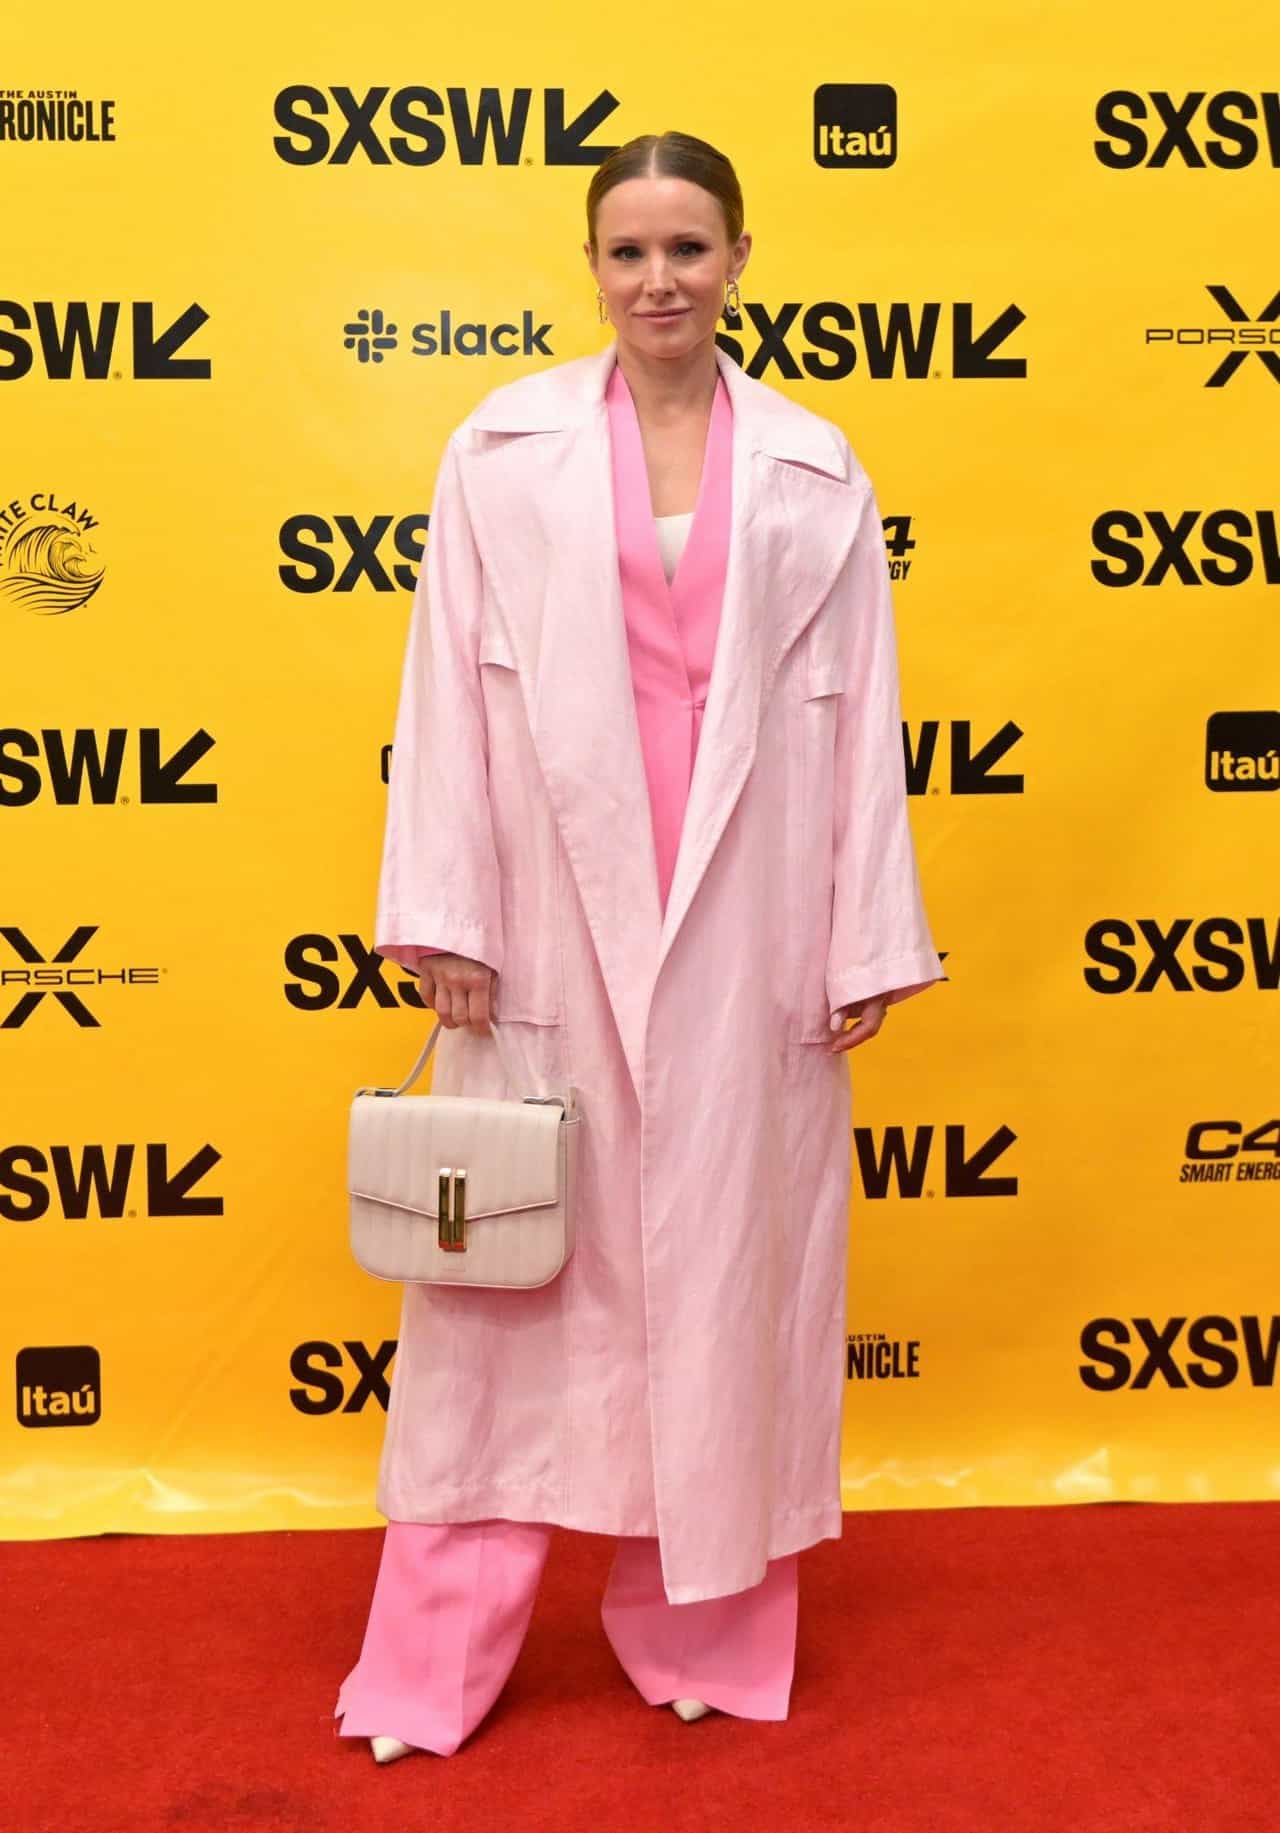 Kristen Bell Looks Fabulous in a Pink Suit at SXSW 2023